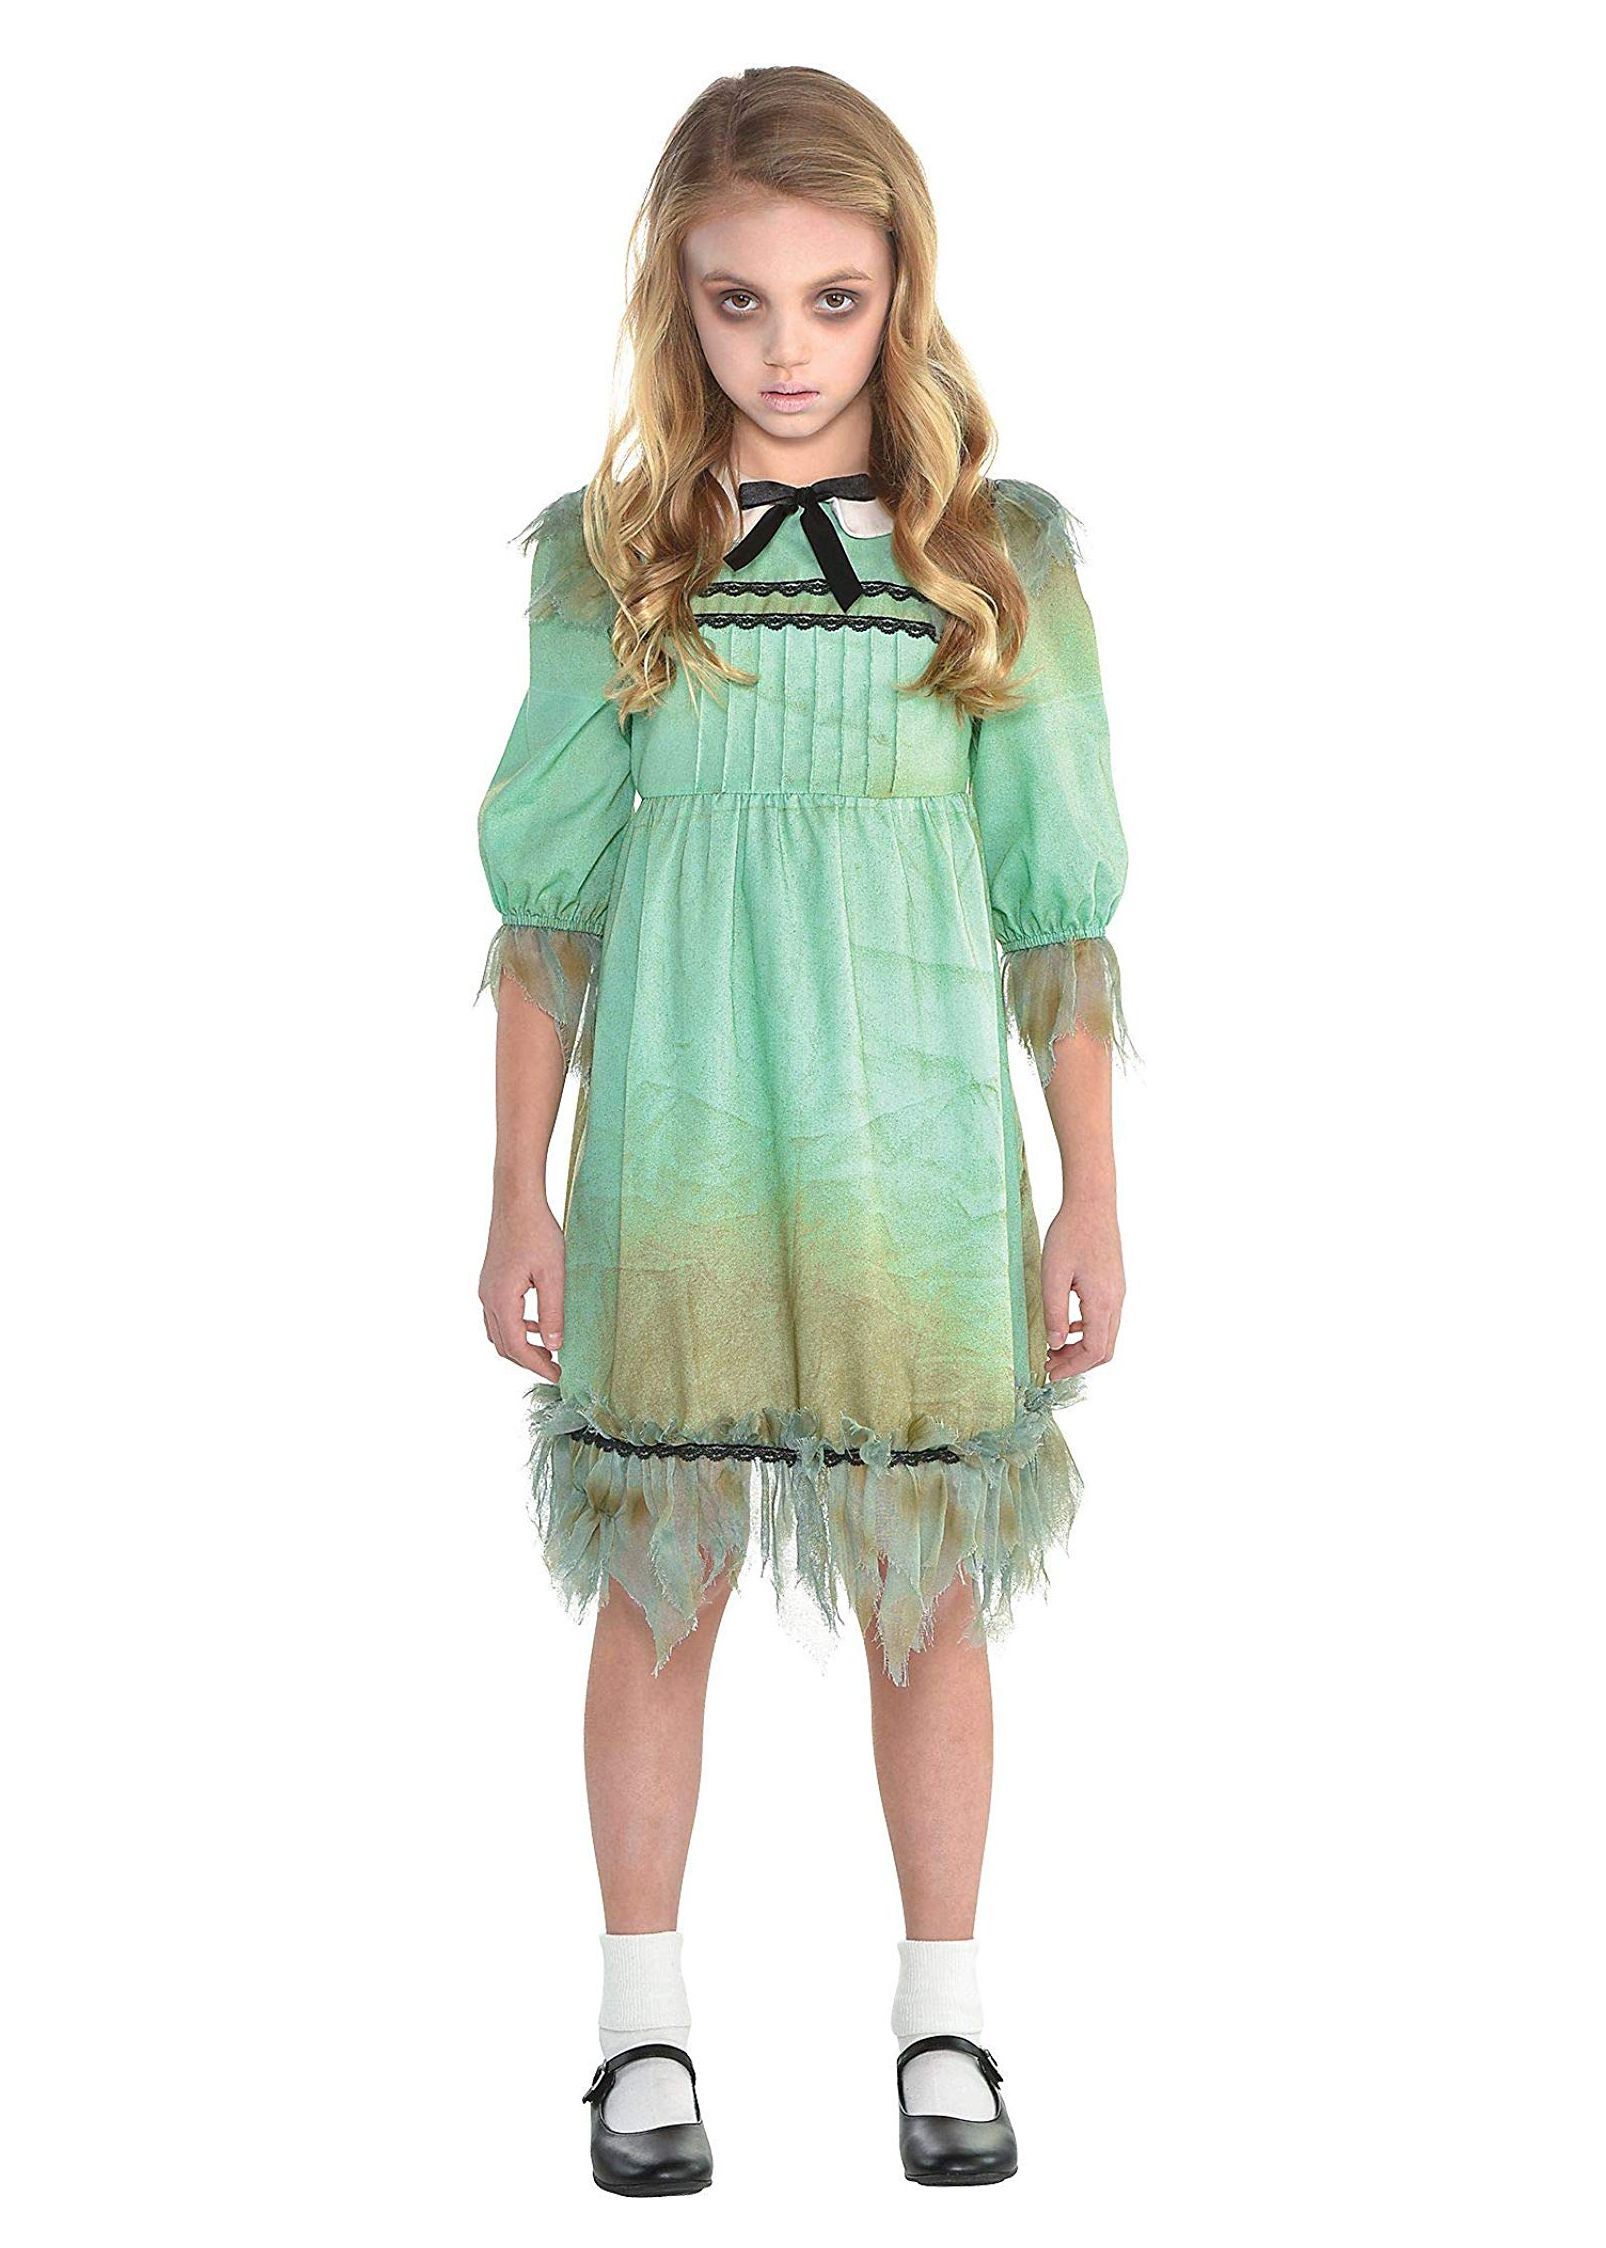 scary-halloween-costumes-for-12-year-olds-girl